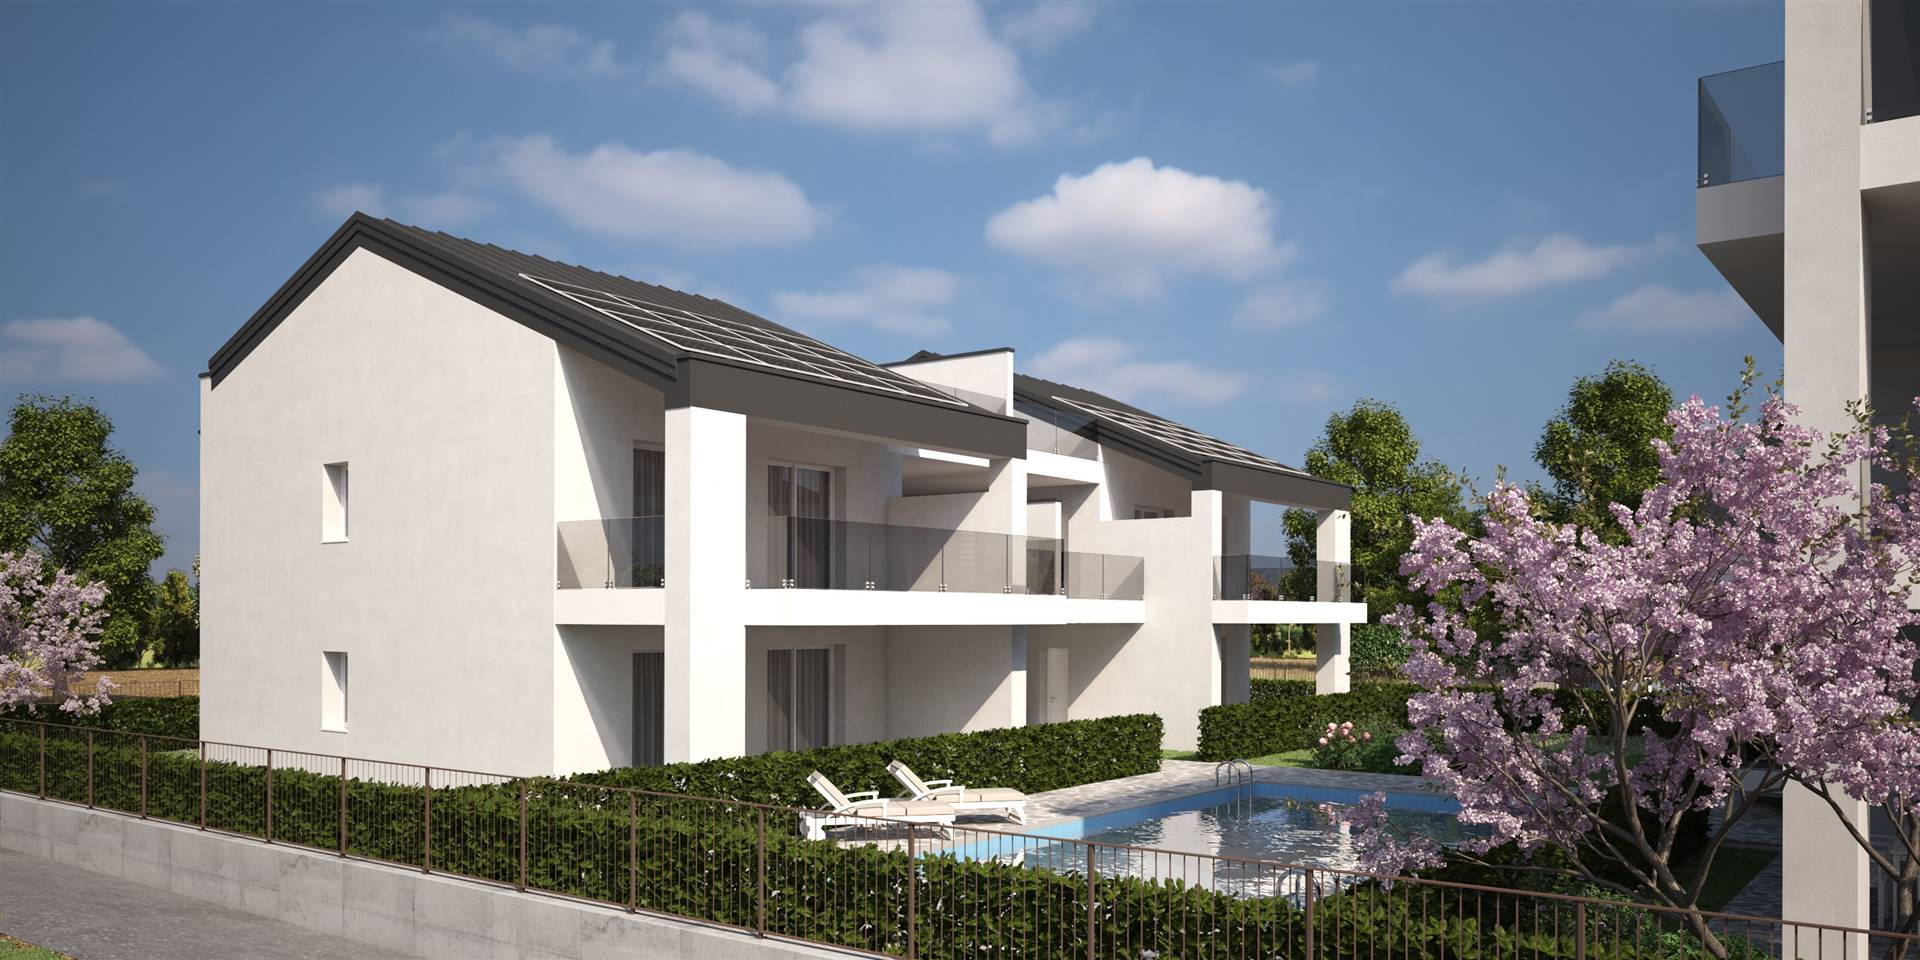 SAN BENEDETTO, PESCHIERA DEL GARDA, Apartment for sale of 198 Sq. mt., New construction, Heating To floor, placed at 1° on 2, composed by: 4 Rooms, Show cooking, , 2 Bedrooms, 2 Bathrooms, Elevator, 